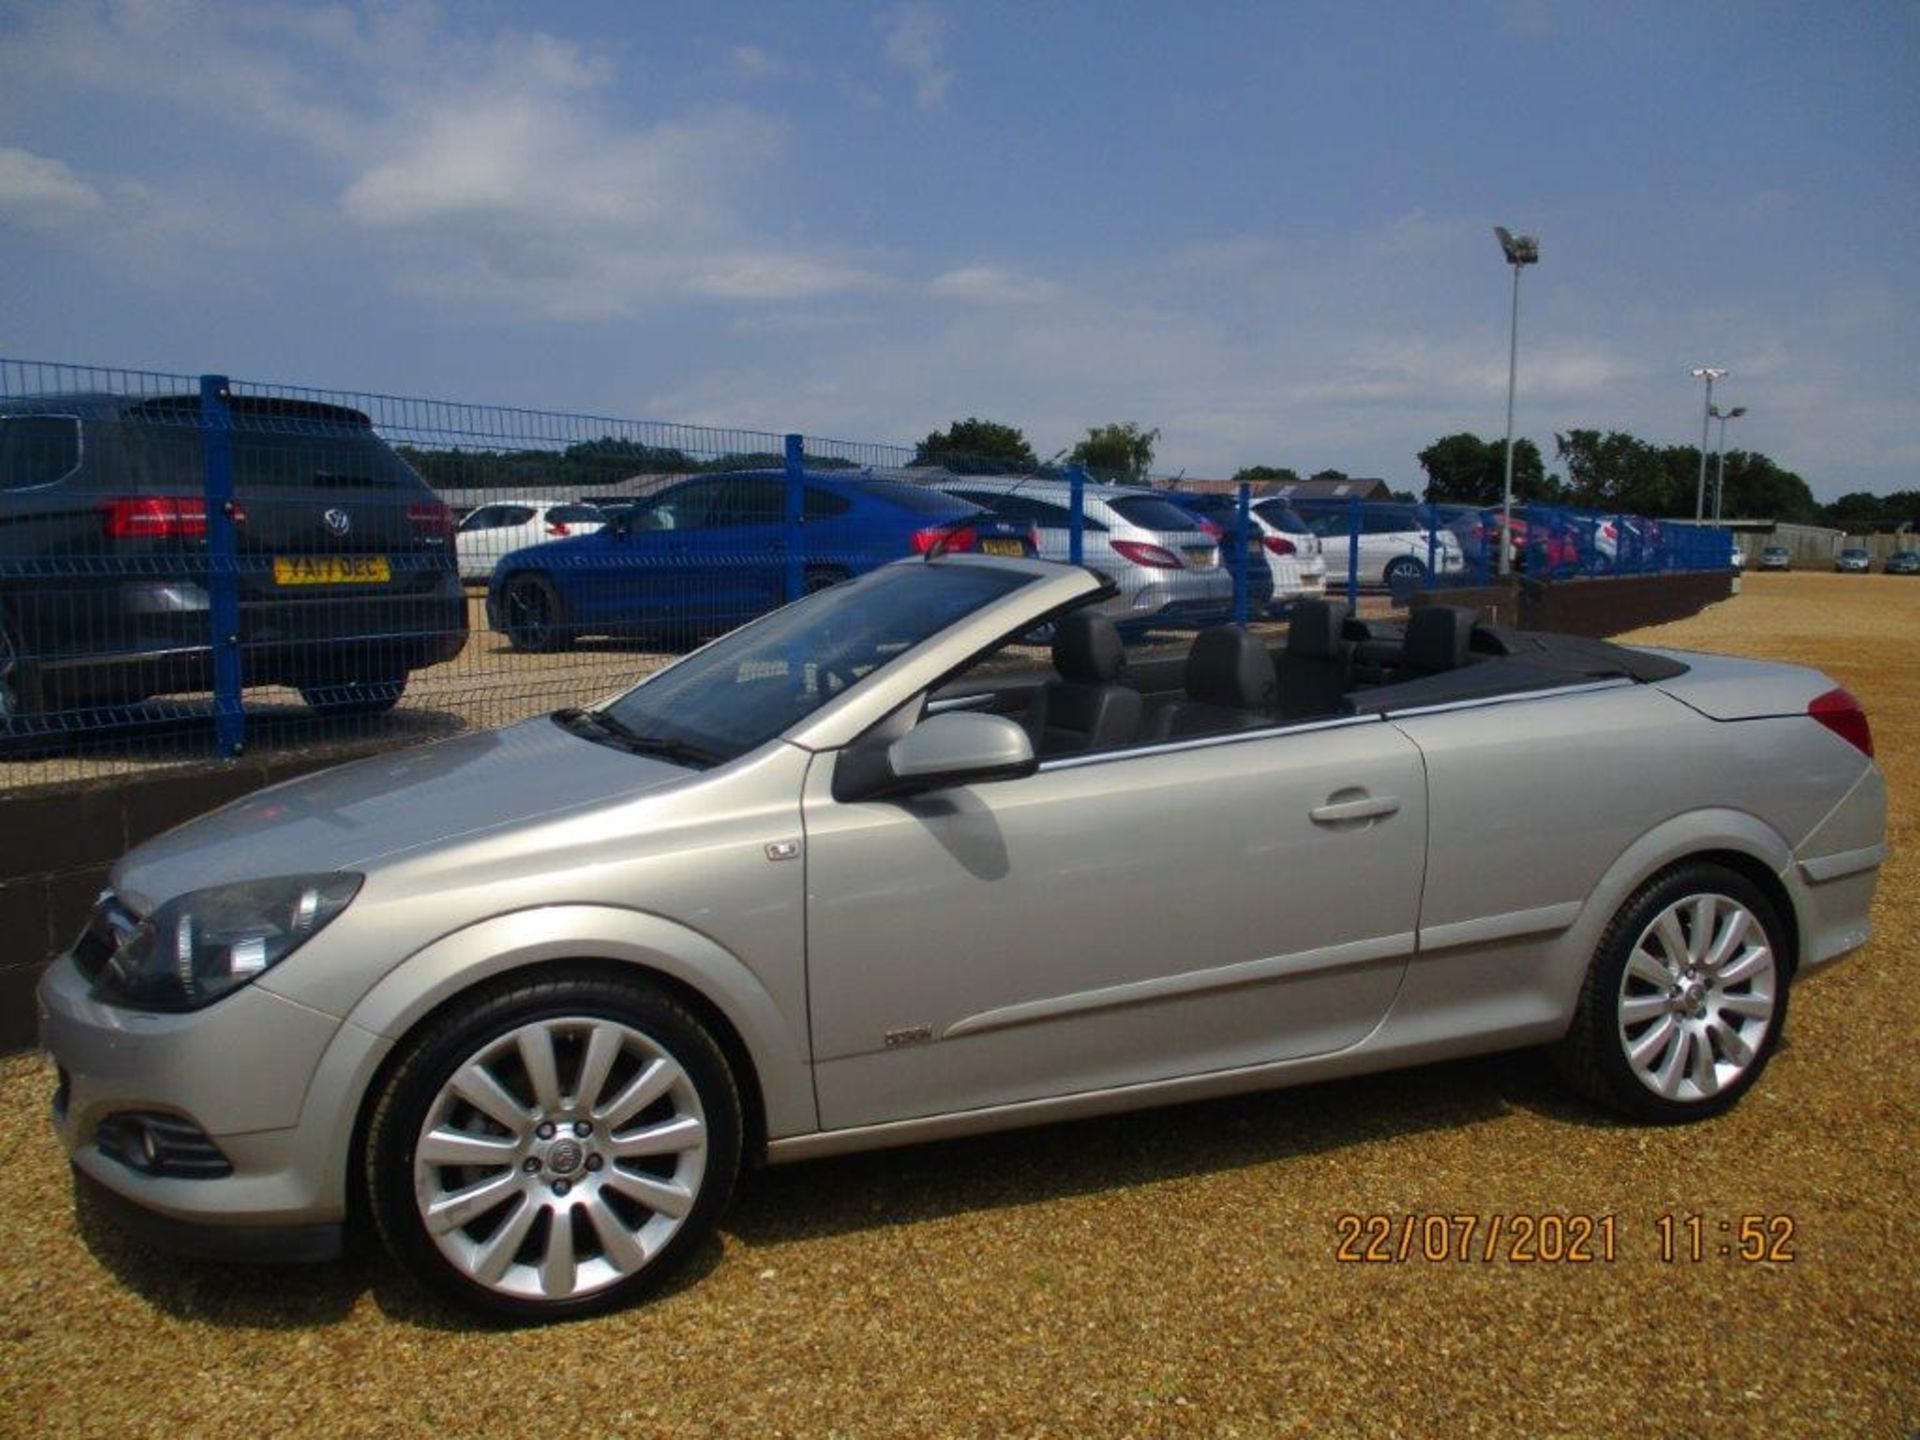 57 08 Vauxhall Astra Twin Top Design - Image 2 of 18